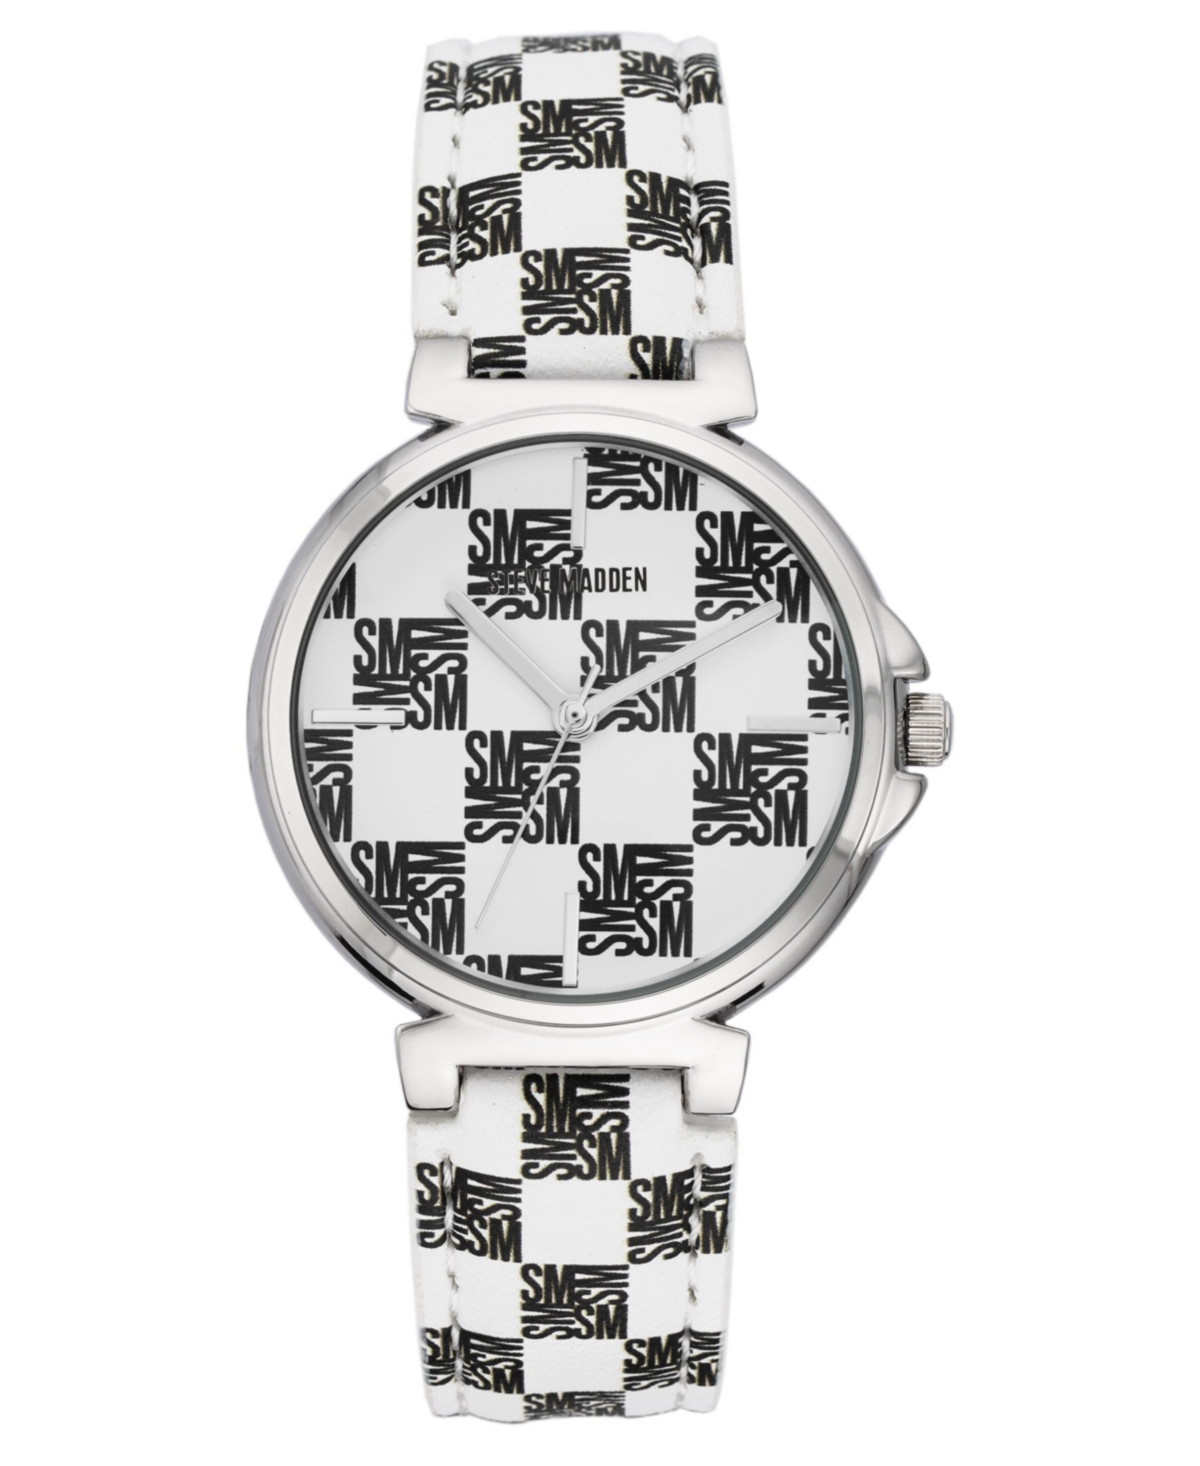 Women's Dual Colored Black and White Polyurethane Leather Strap with Steve Madden Logo in Checkered Pattern and Stitching Watch, 36mm - W